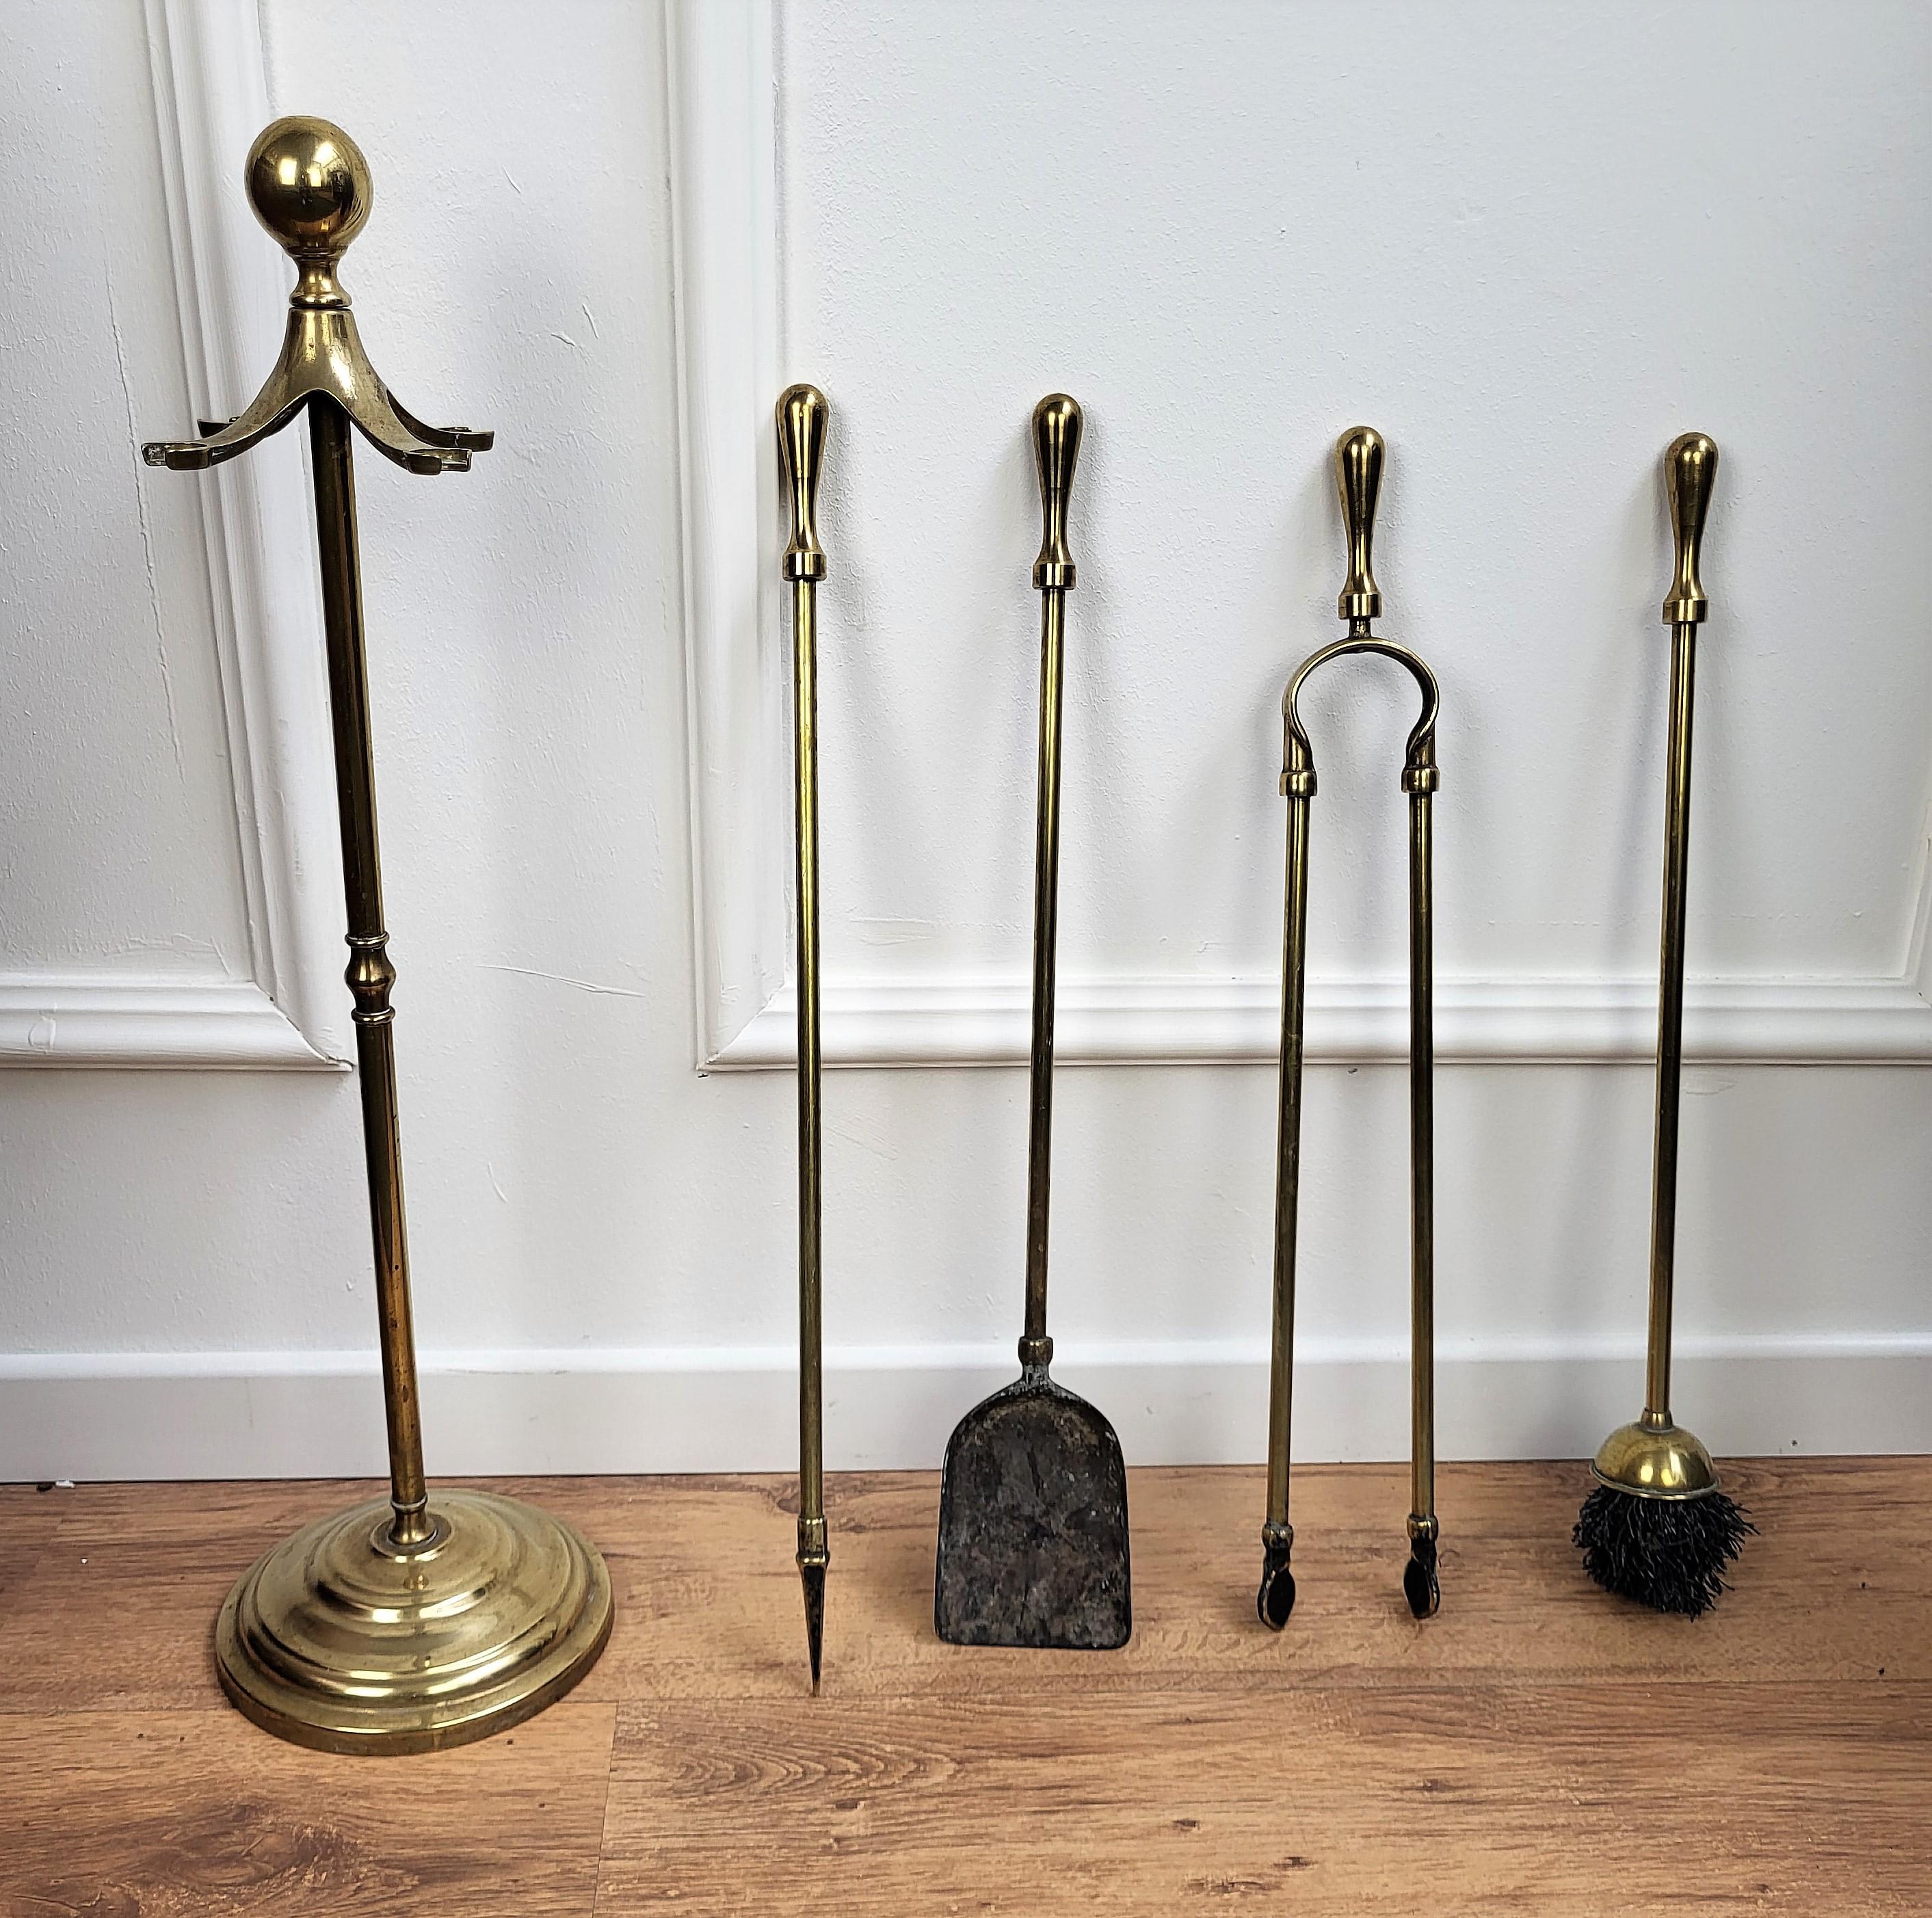 Italian Four-Piece Brass Vintage Fireplace Fire Tool Set with Stand 1